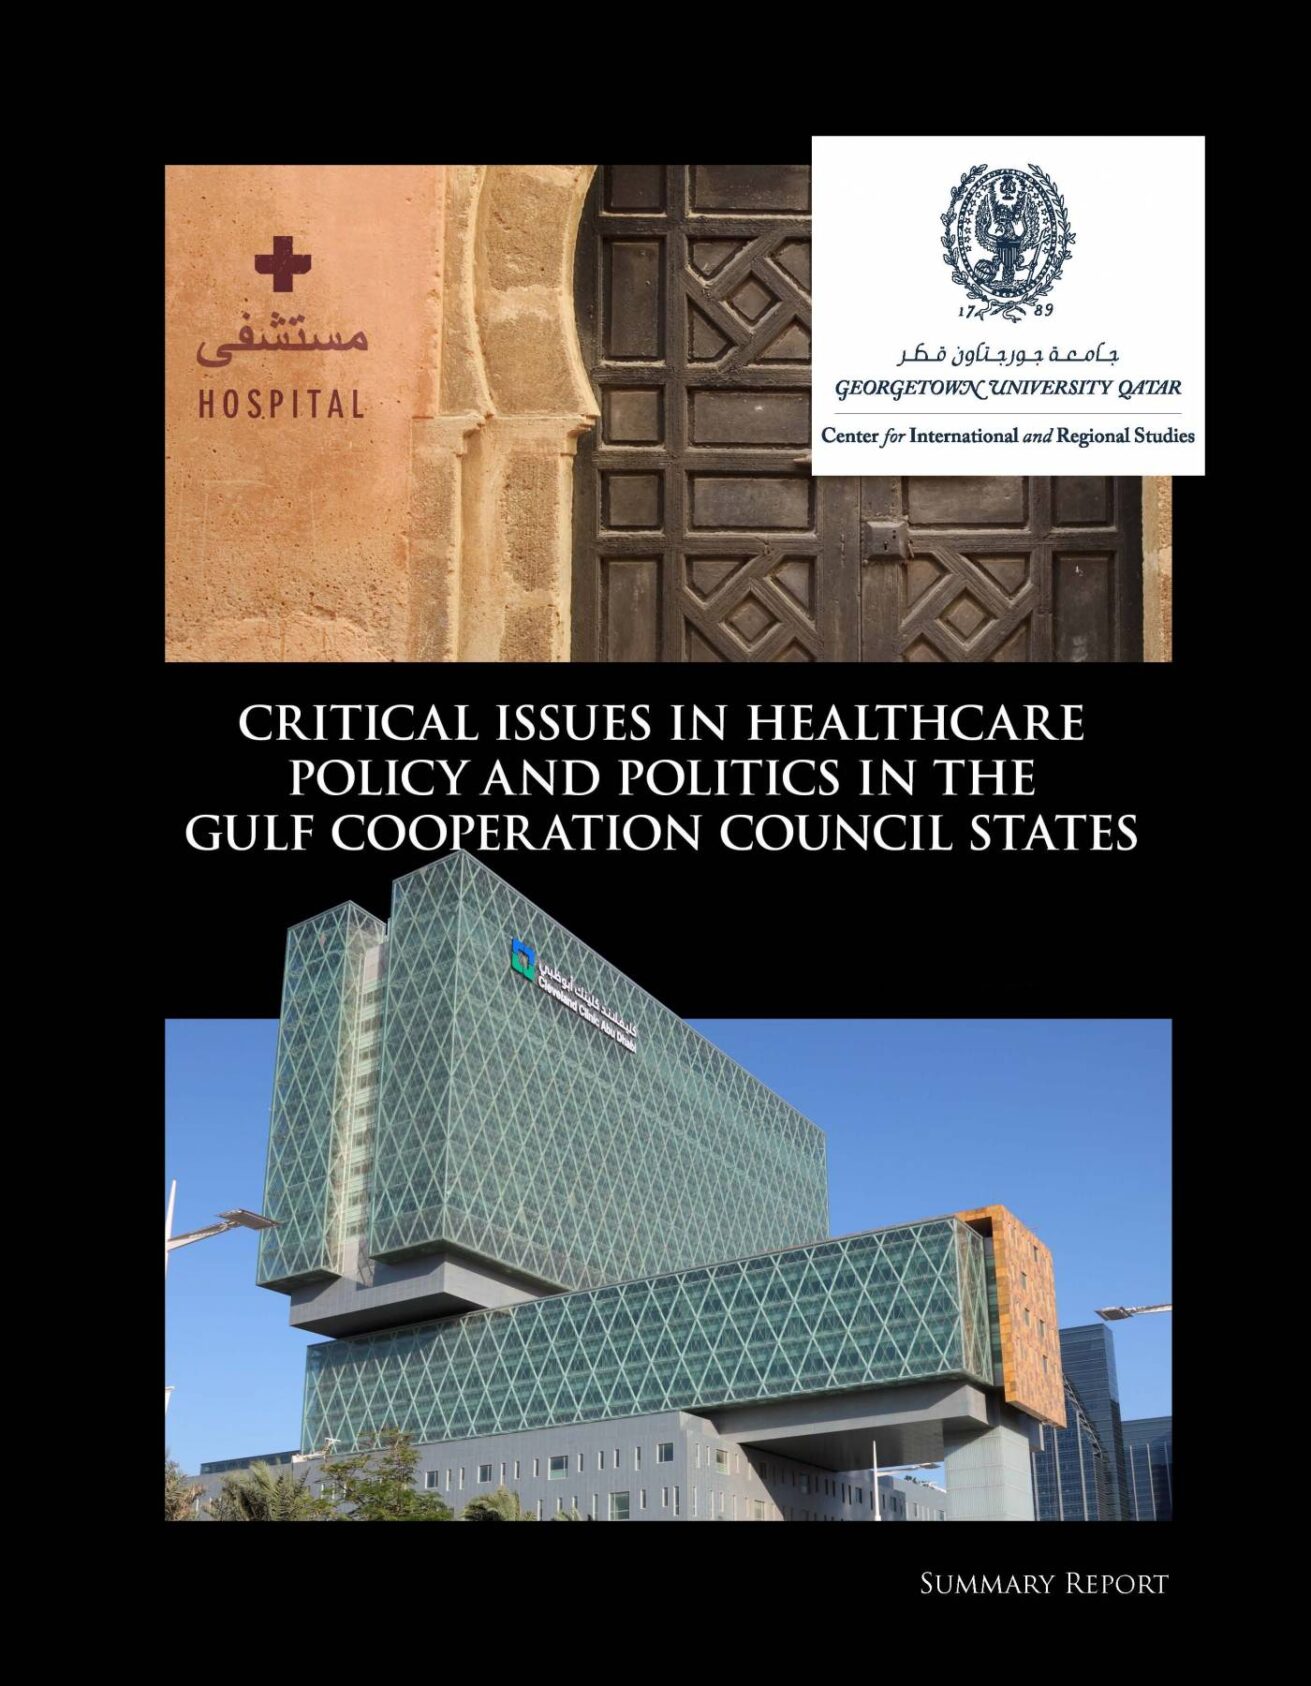 Critical Issues in Healthcare Policy and Politics in the GCC